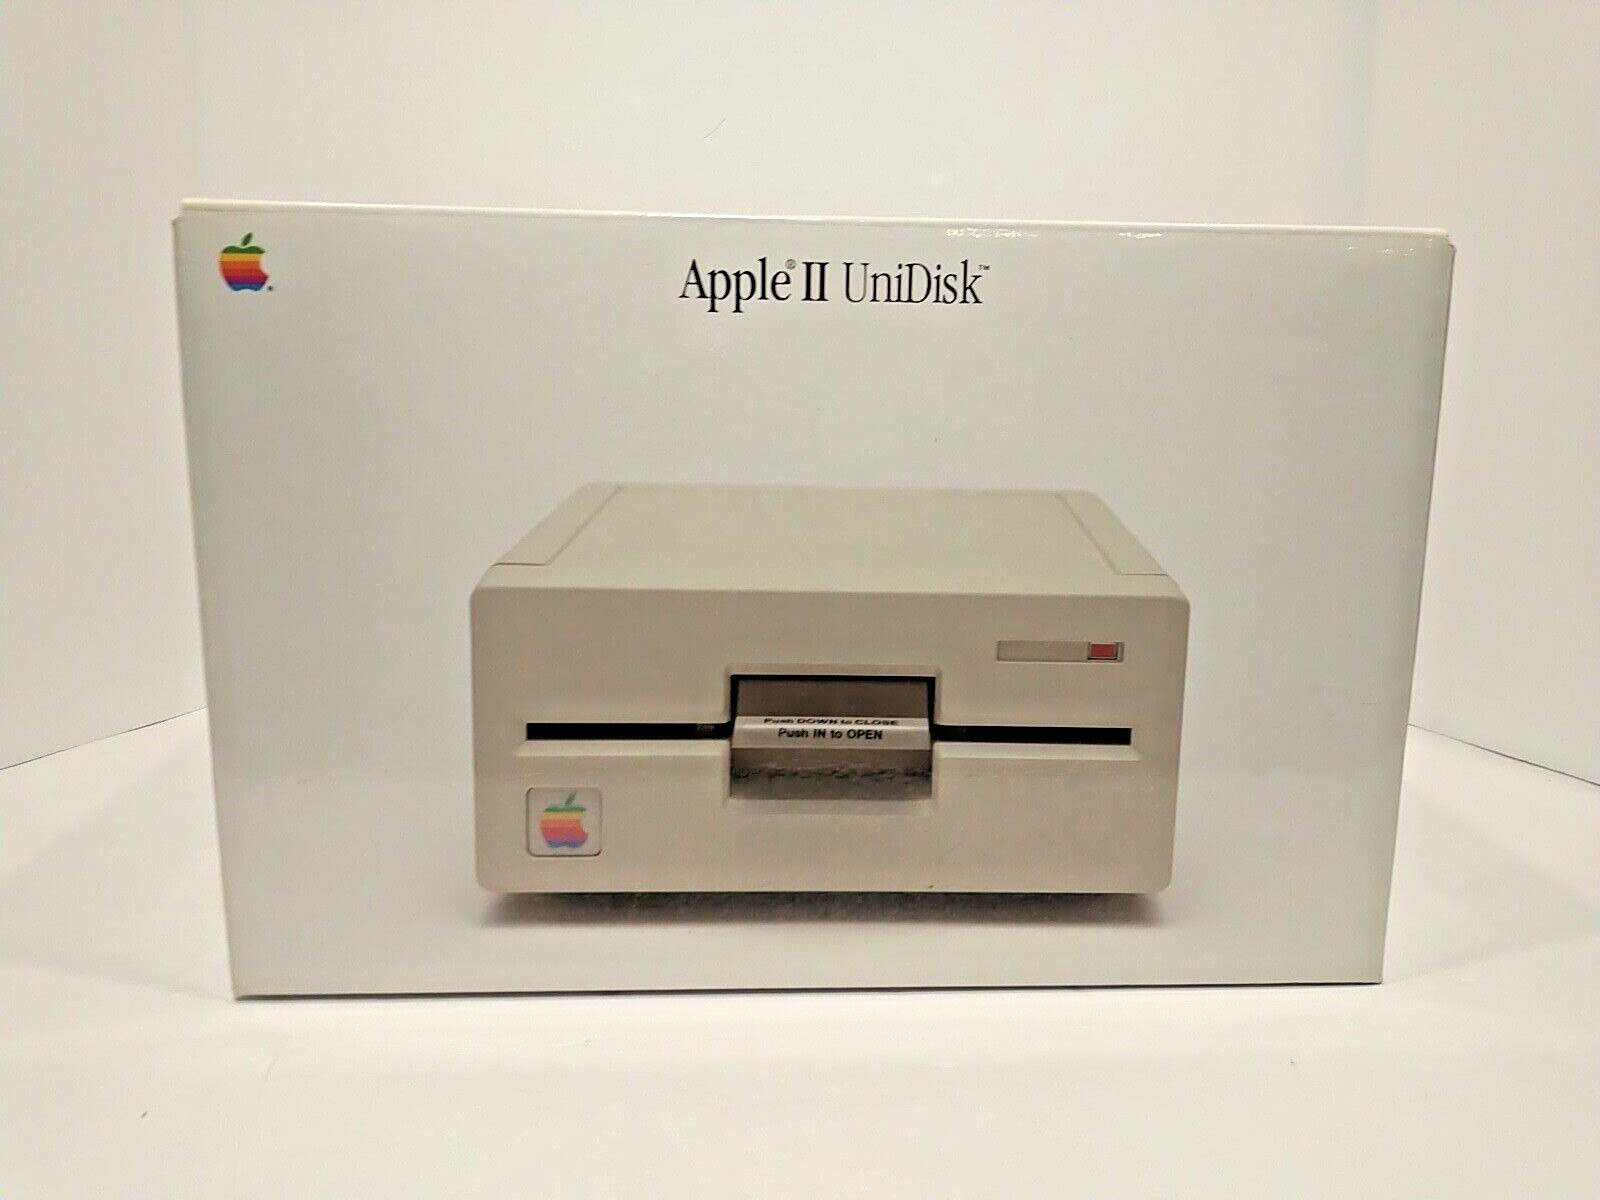 Apple II 5.25” Unidisk Floppy Disk Drive-Box/Manuals–A9M0104–UNTESTED - READ  s3